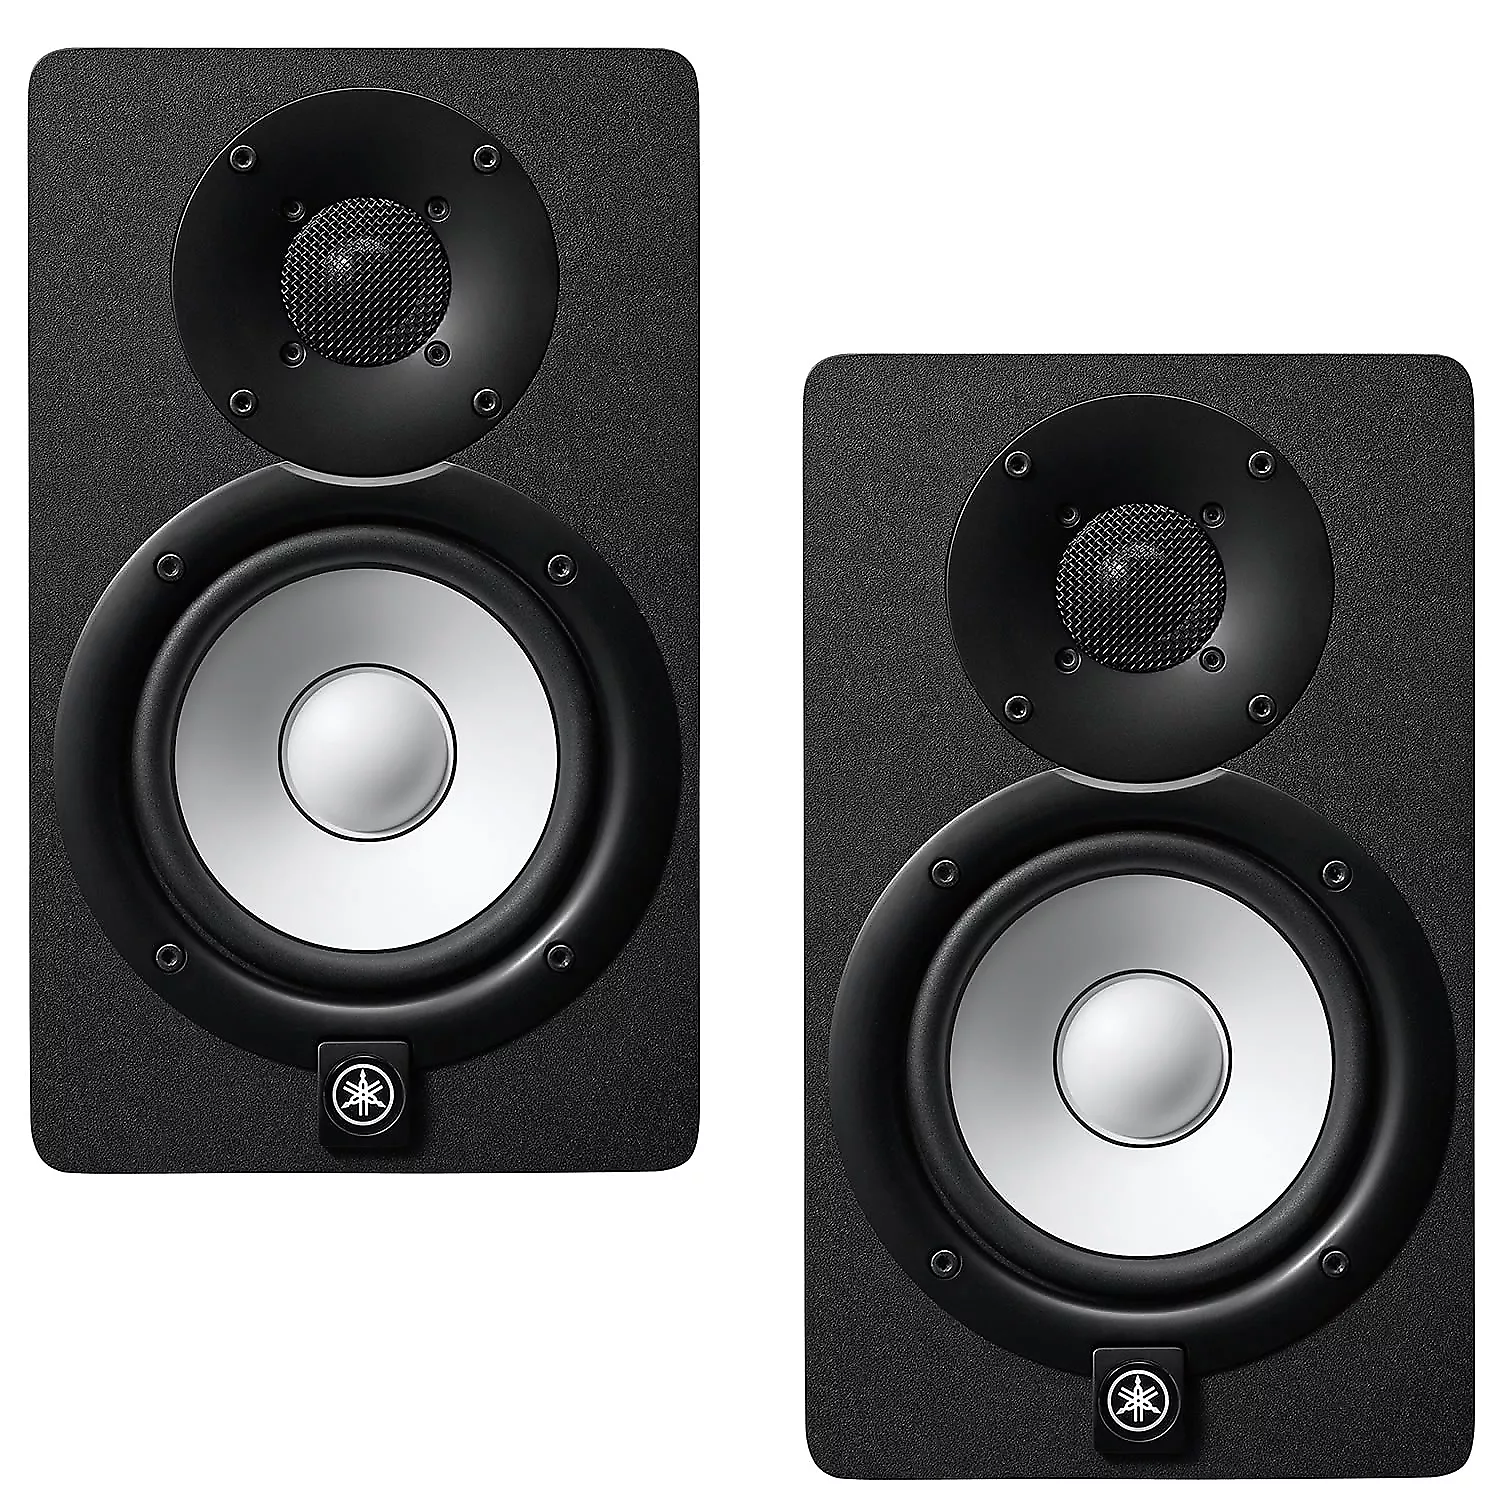 Yamaha HS5 Review: Ultimate Studio Monitor Guide